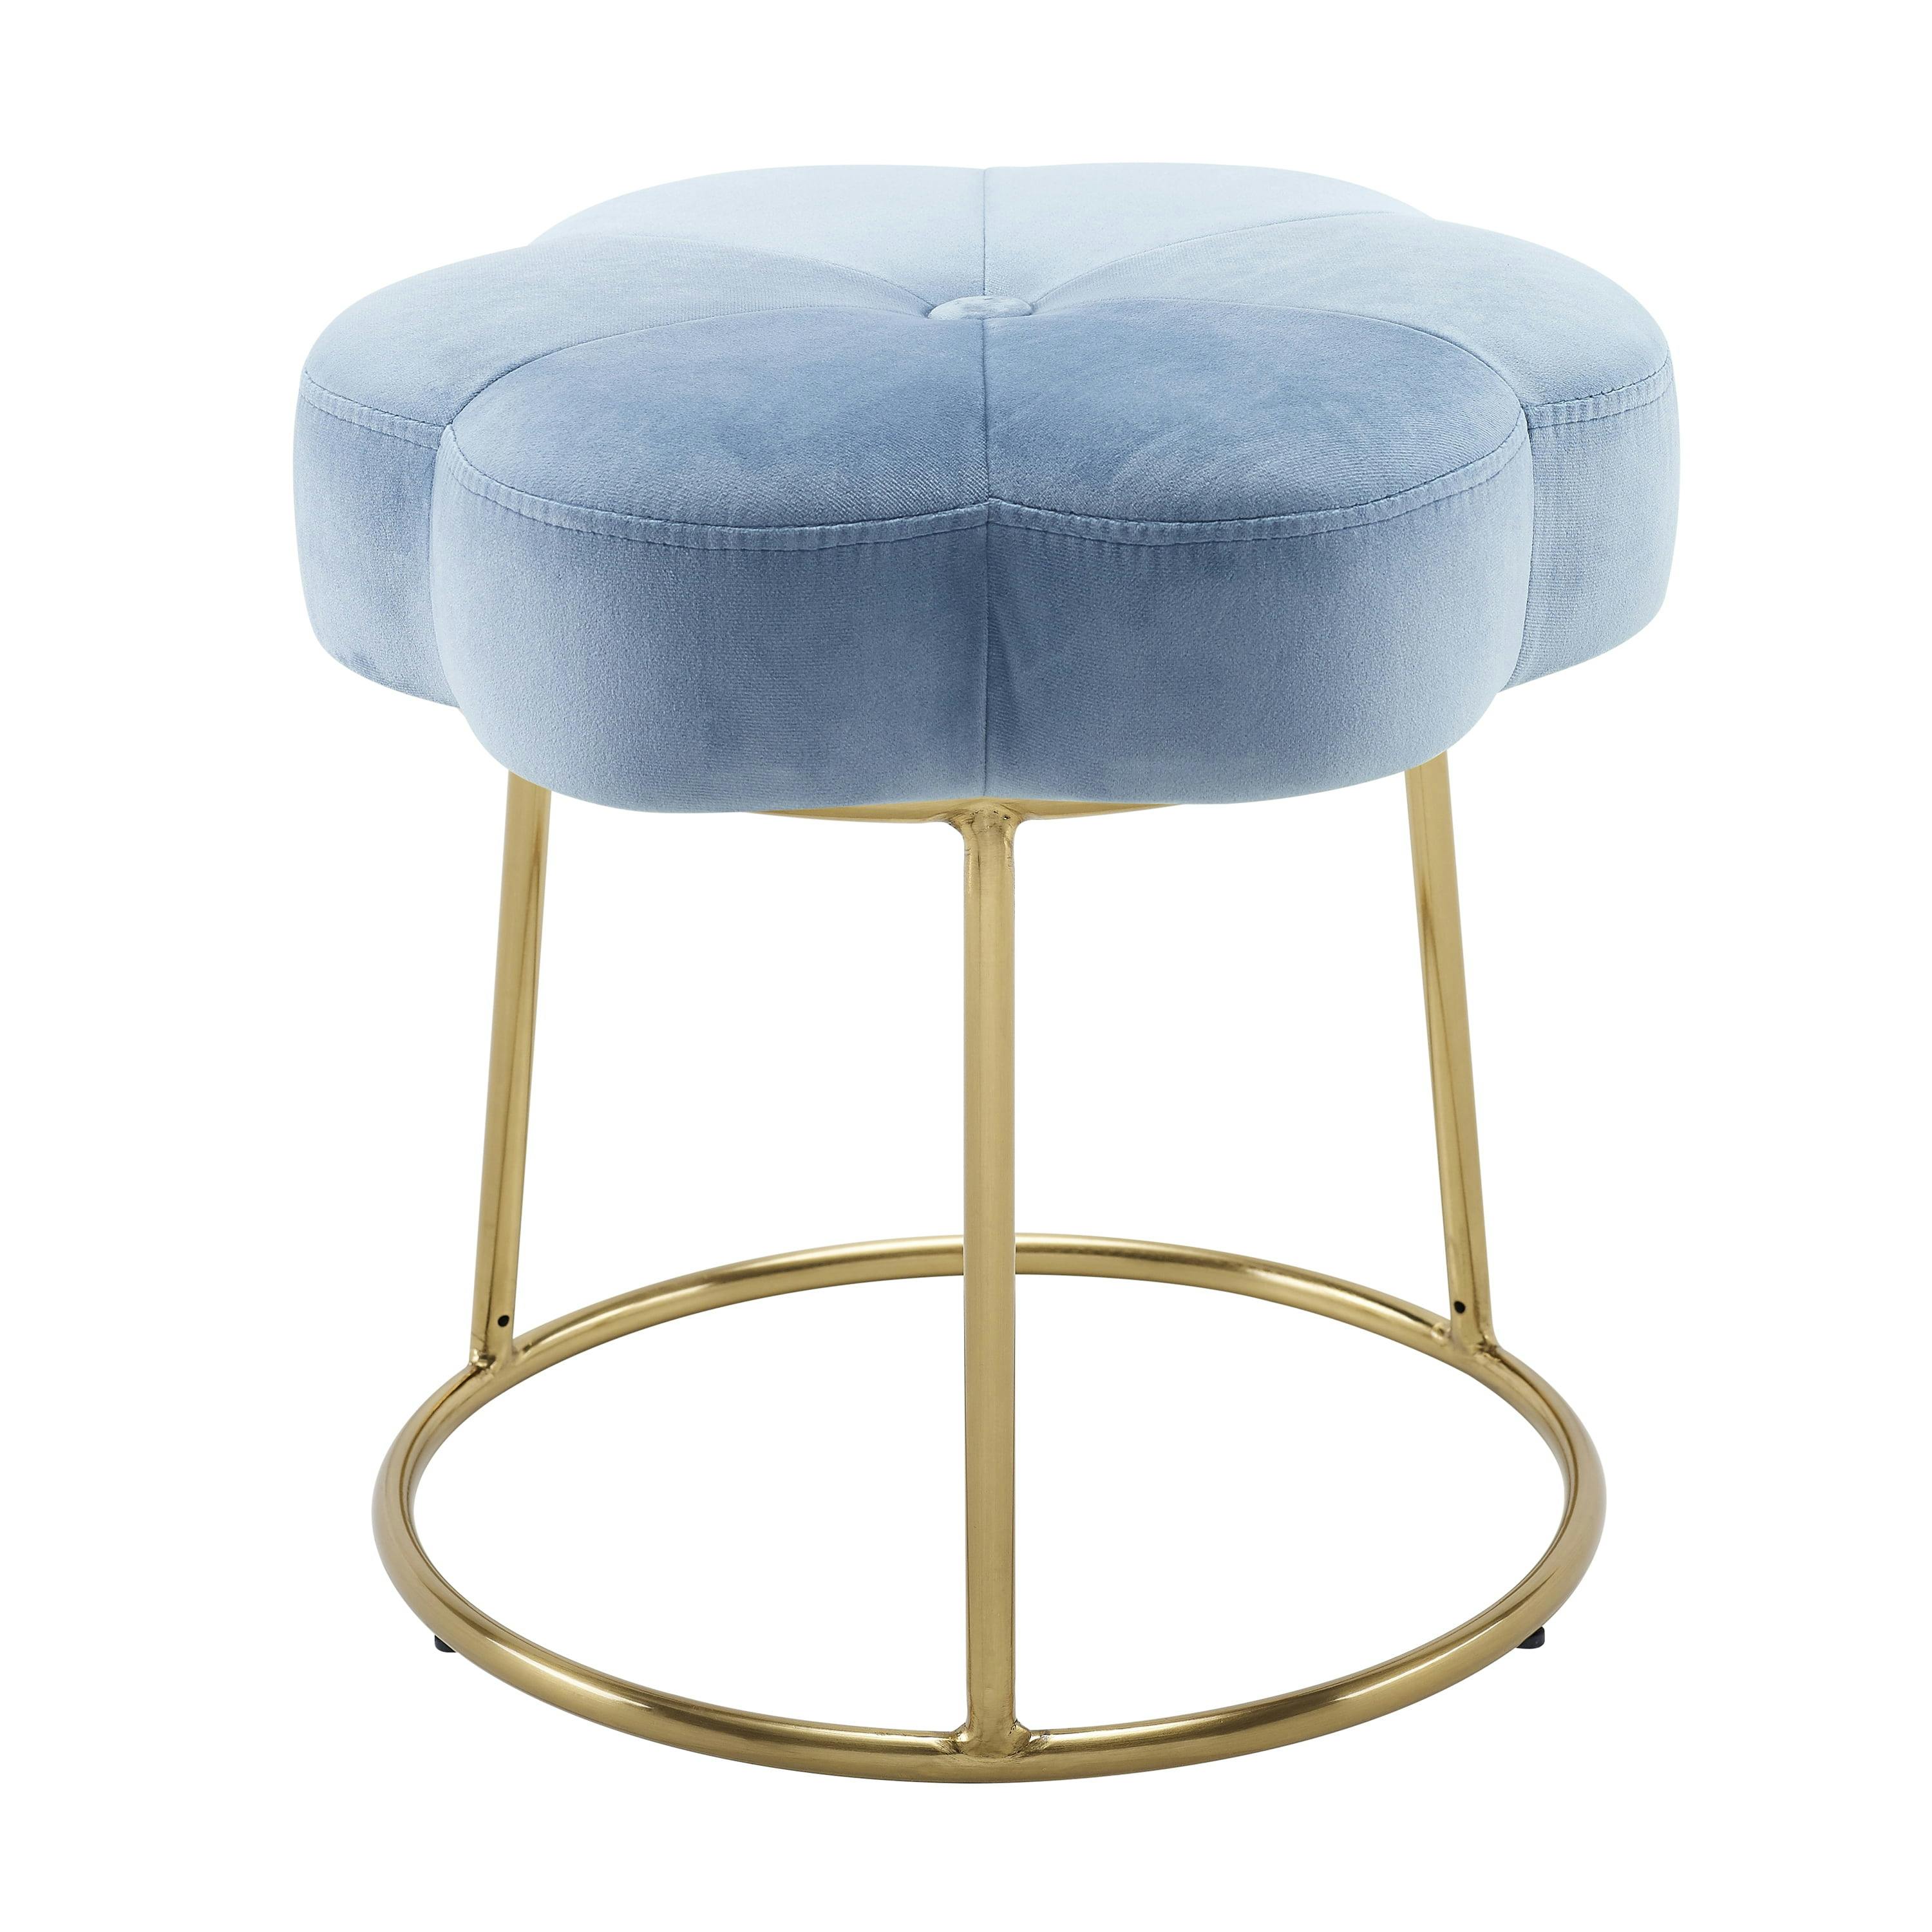 Linon Light Blue and Gold Vanity and Accent Talulah Stool